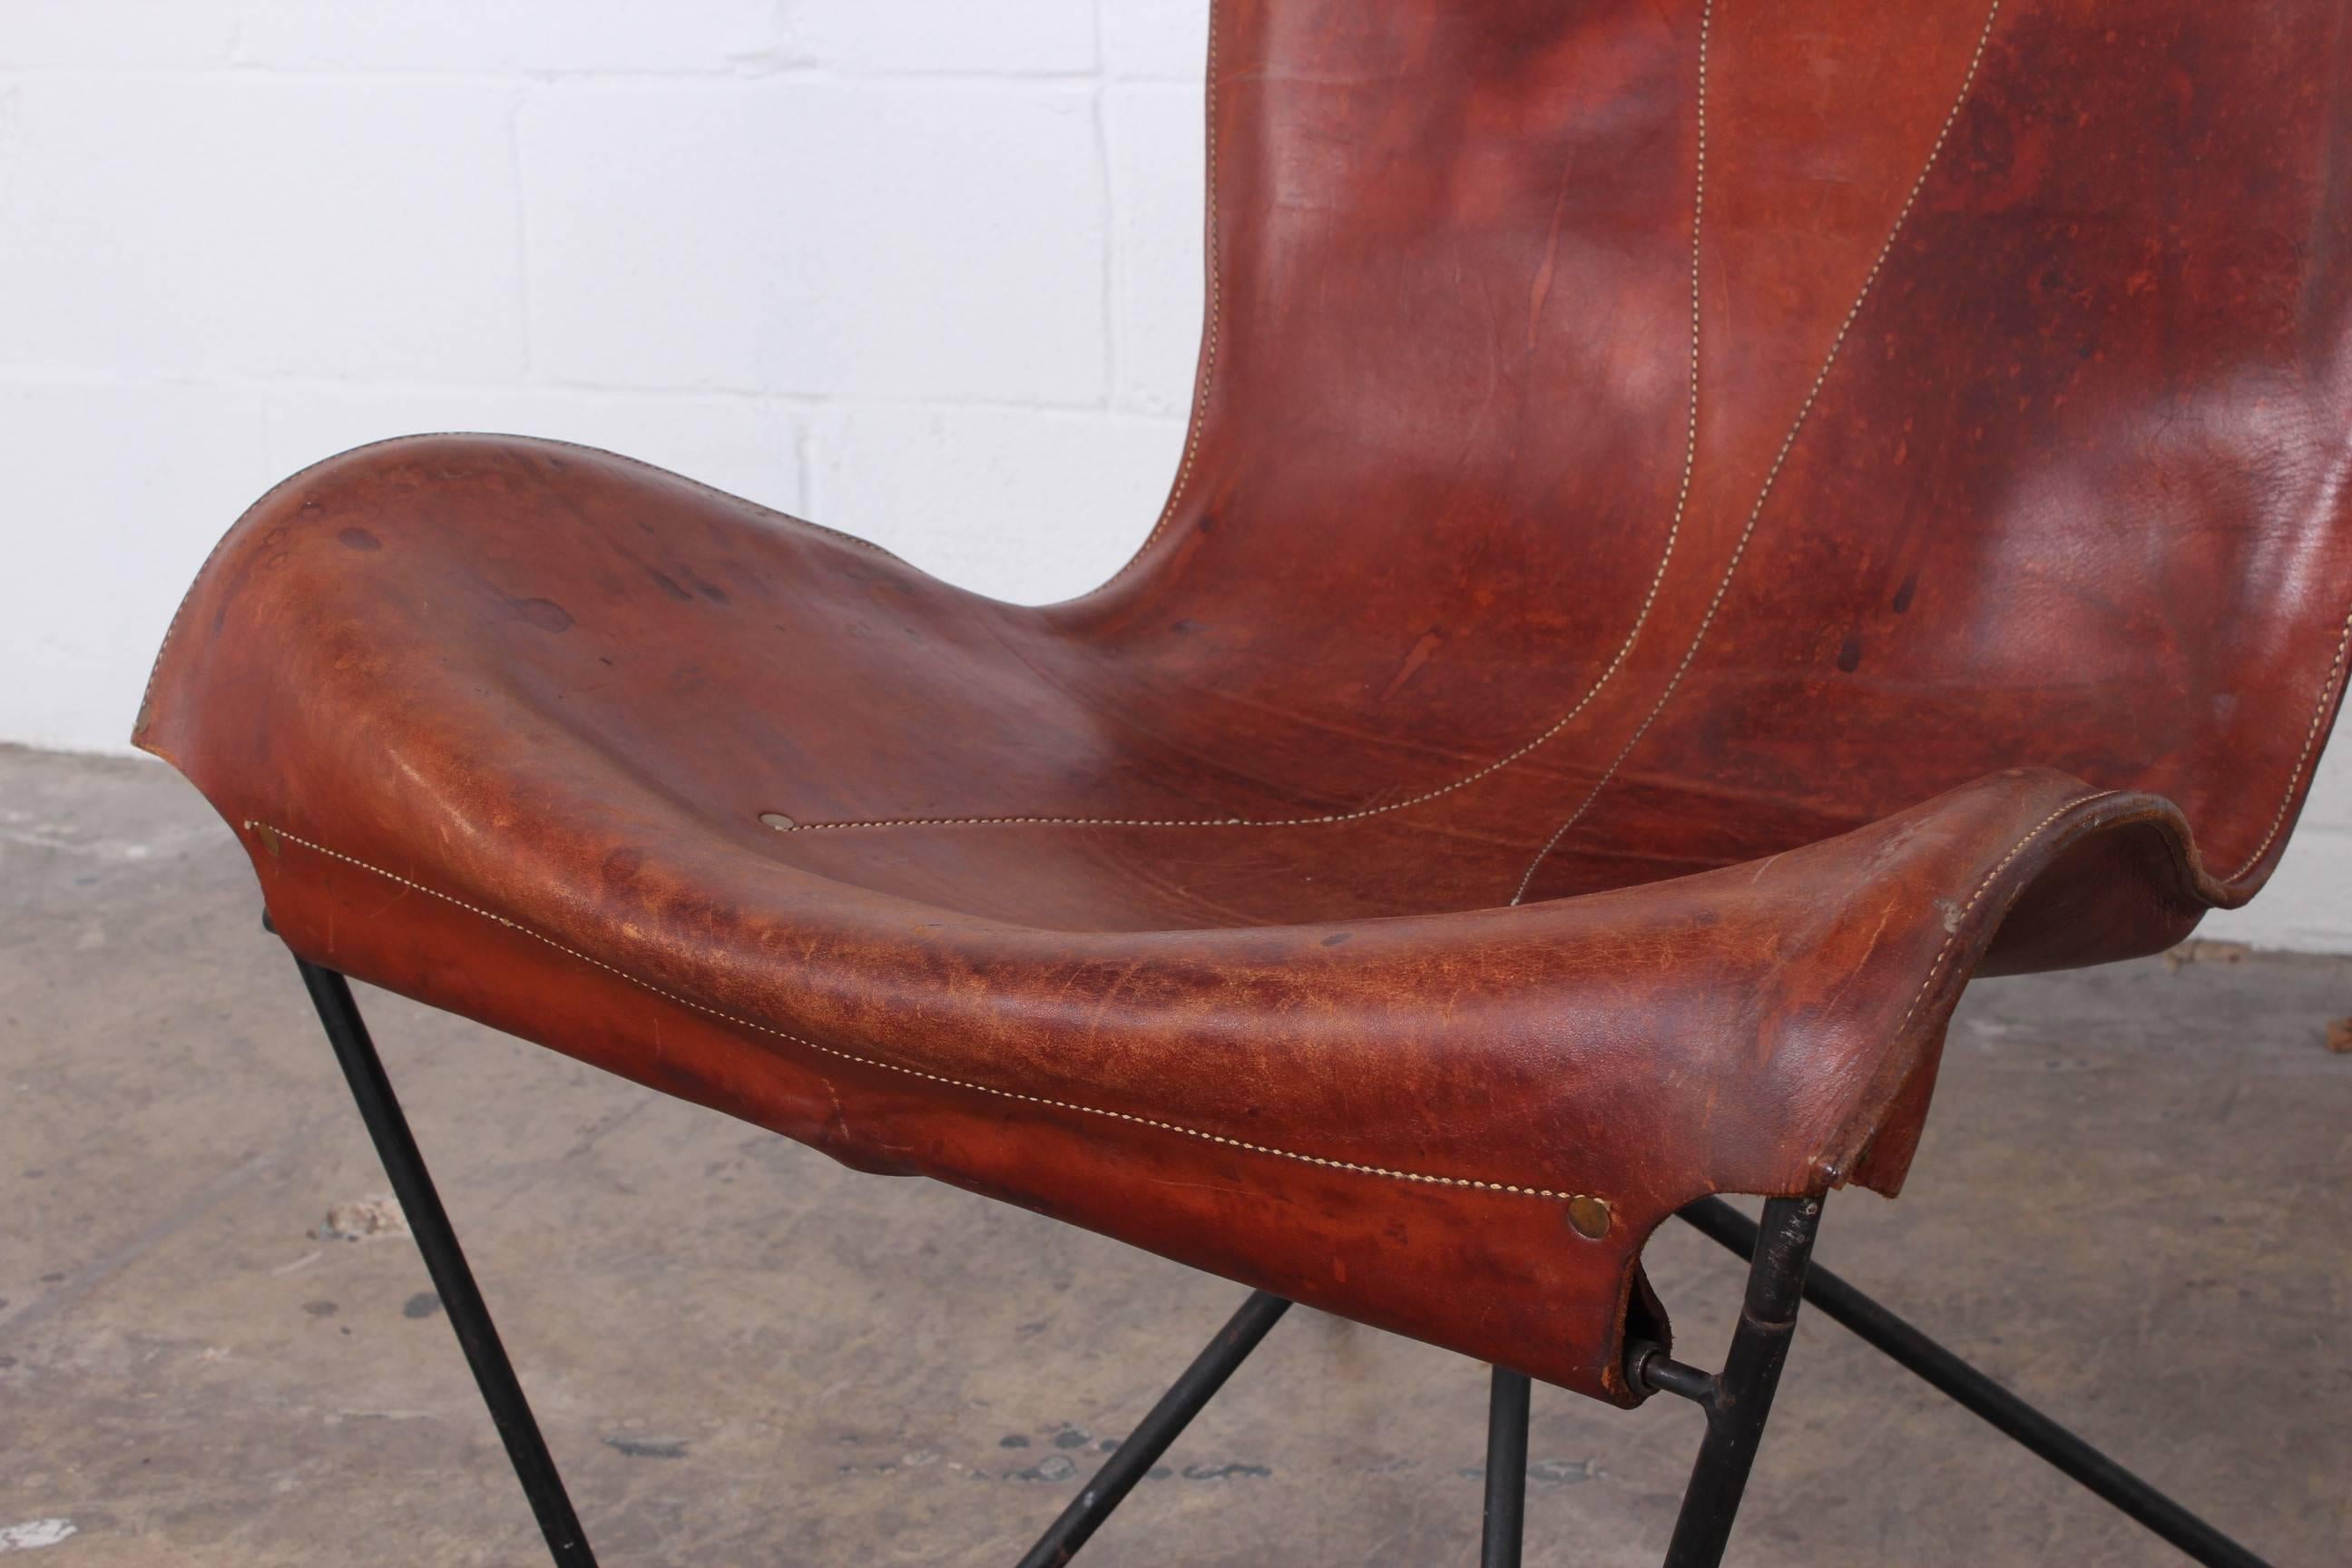 A beautifully patinated leather lounge chair with iron frame made by Max Gottschalk.